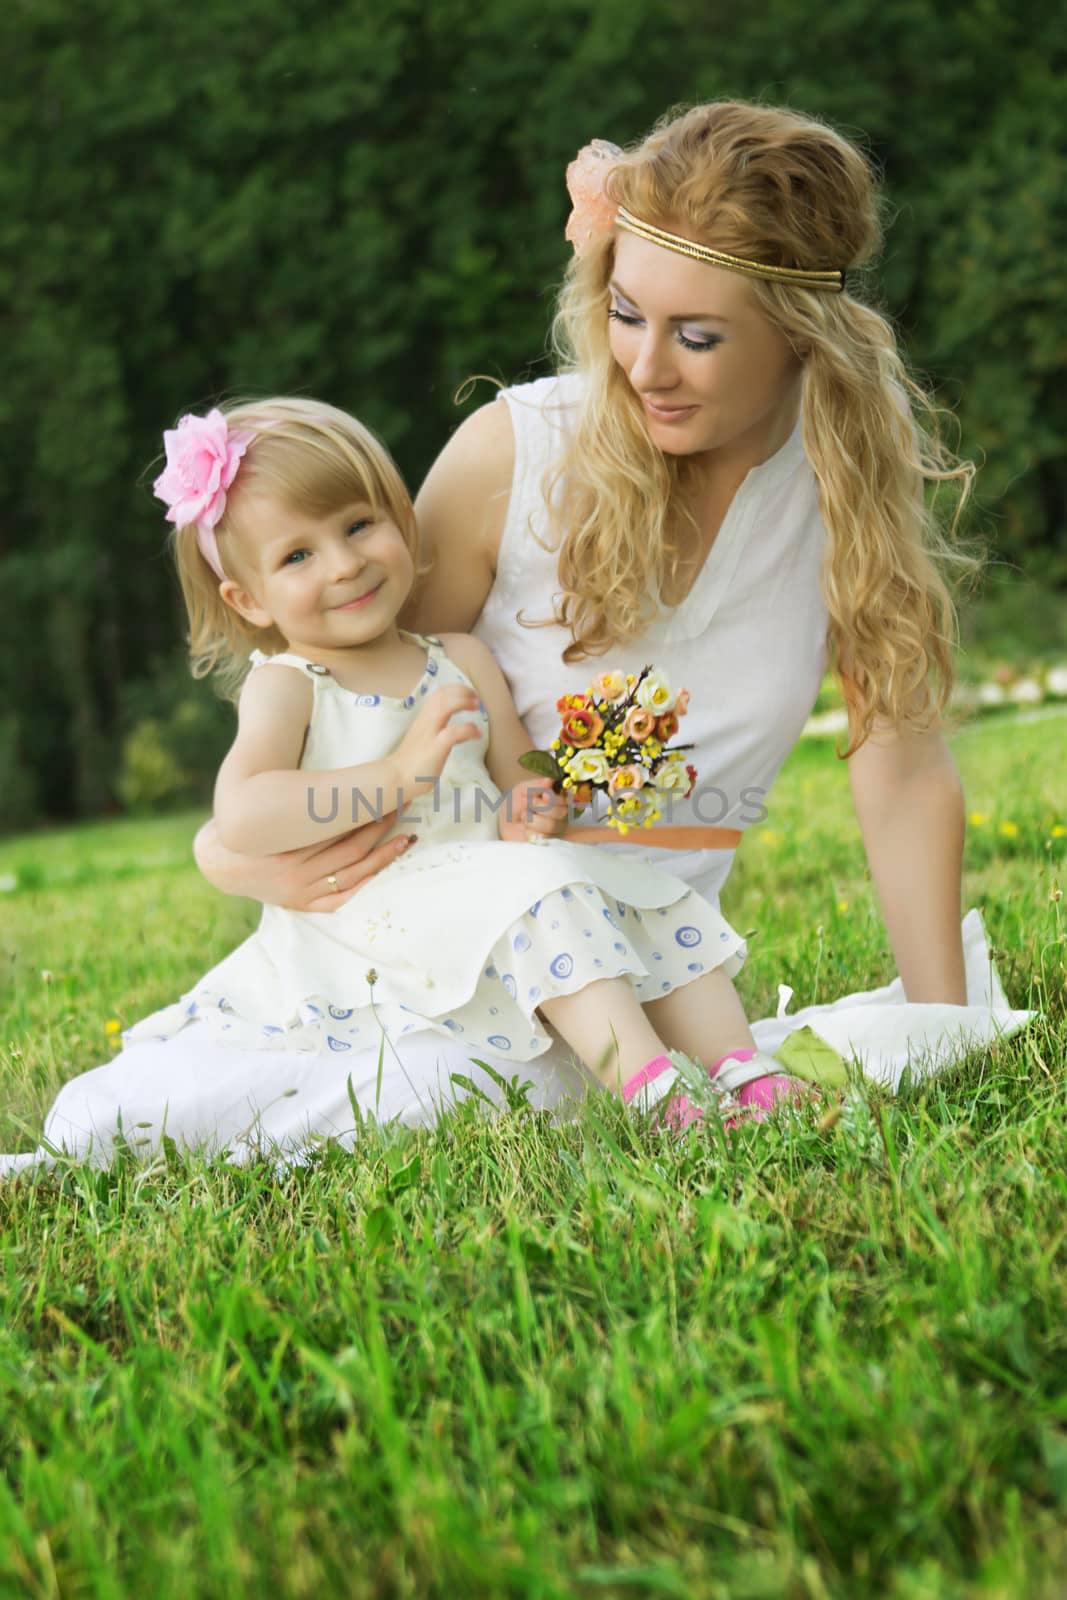 Romantic mother and smiling daughter sitting on grass